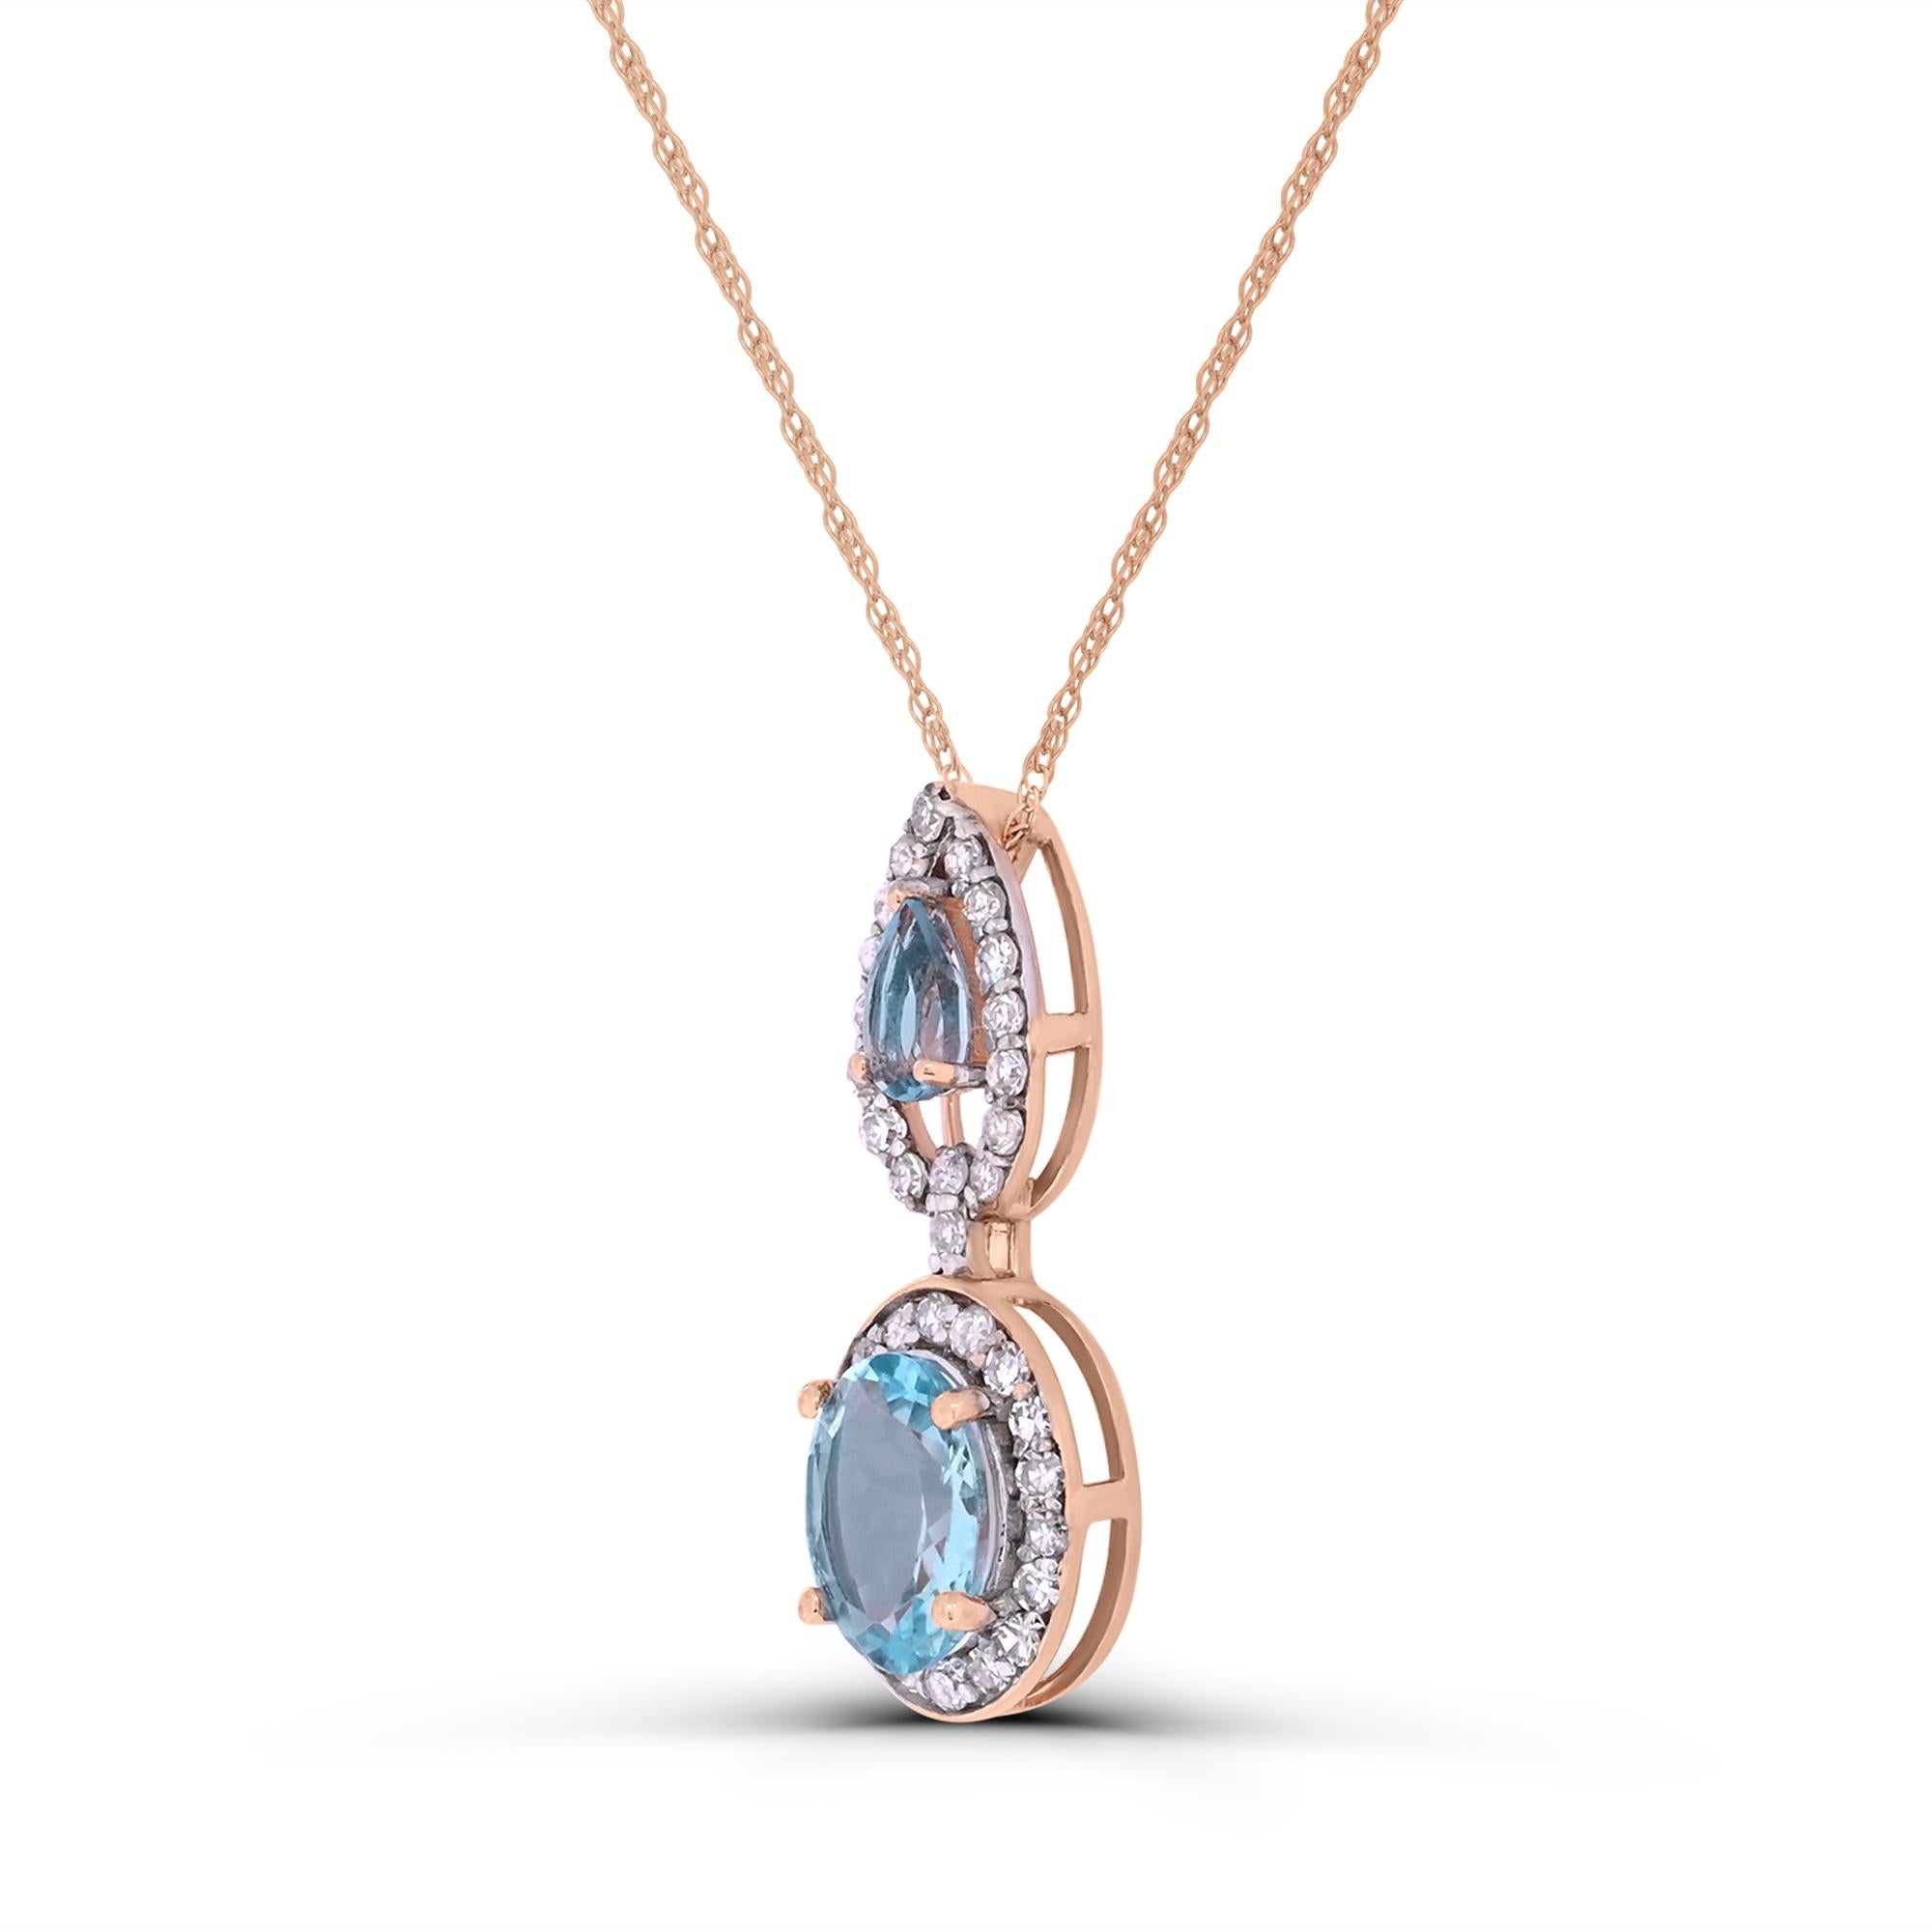 Indulge in the elegance of our Aquamarine and White Diamond Drop Pendant Necklace in 14K Rose Gold. Crafted with meticulous attention to detail, this necklace boasts a stunning combination of one oval-cut and one pear-cut aquamarine accented by